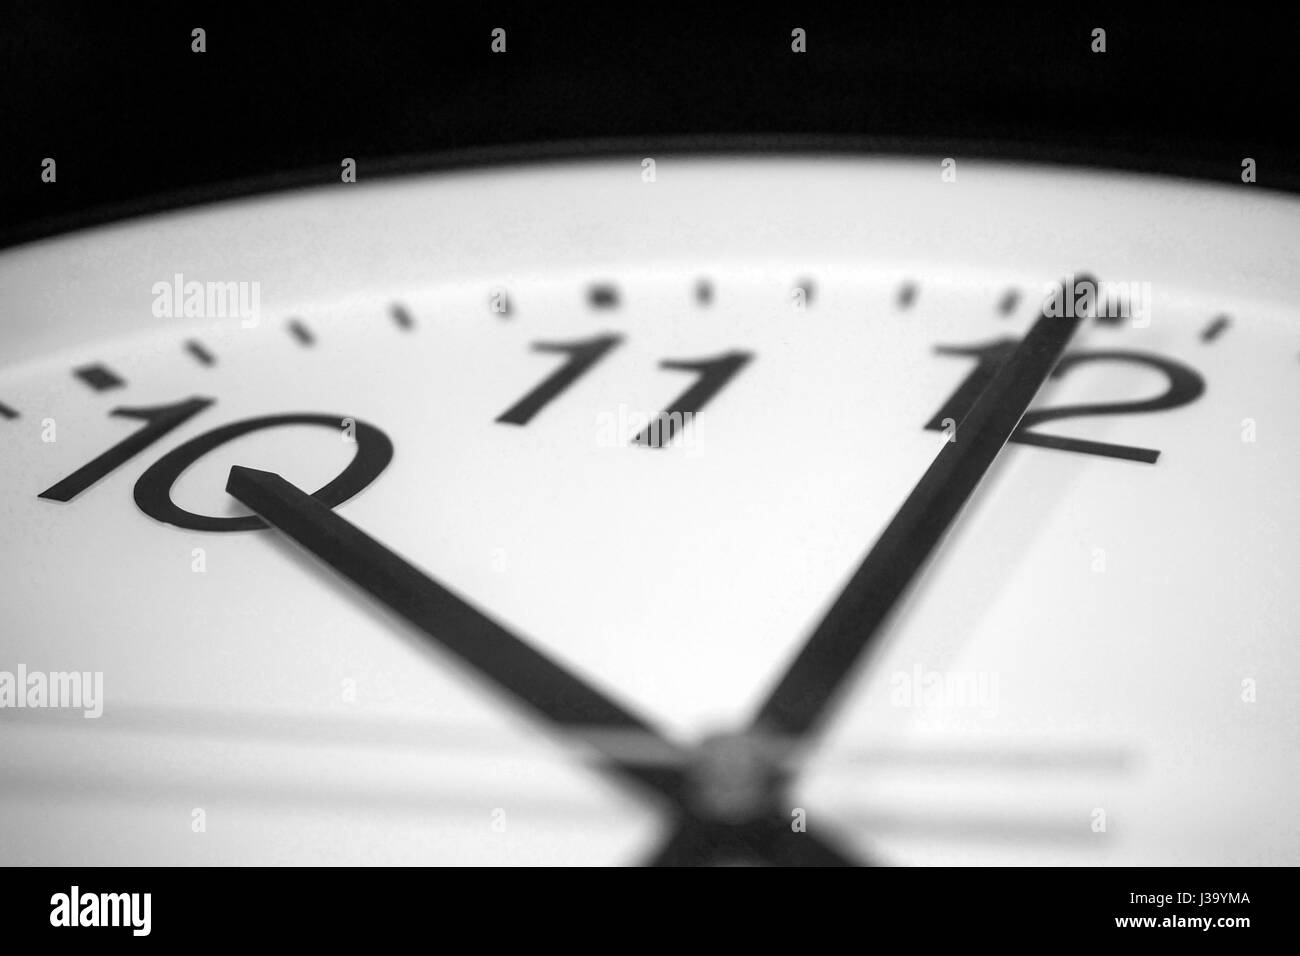 Ten Oclock High Resolution Stock Photography and Images - Alamy